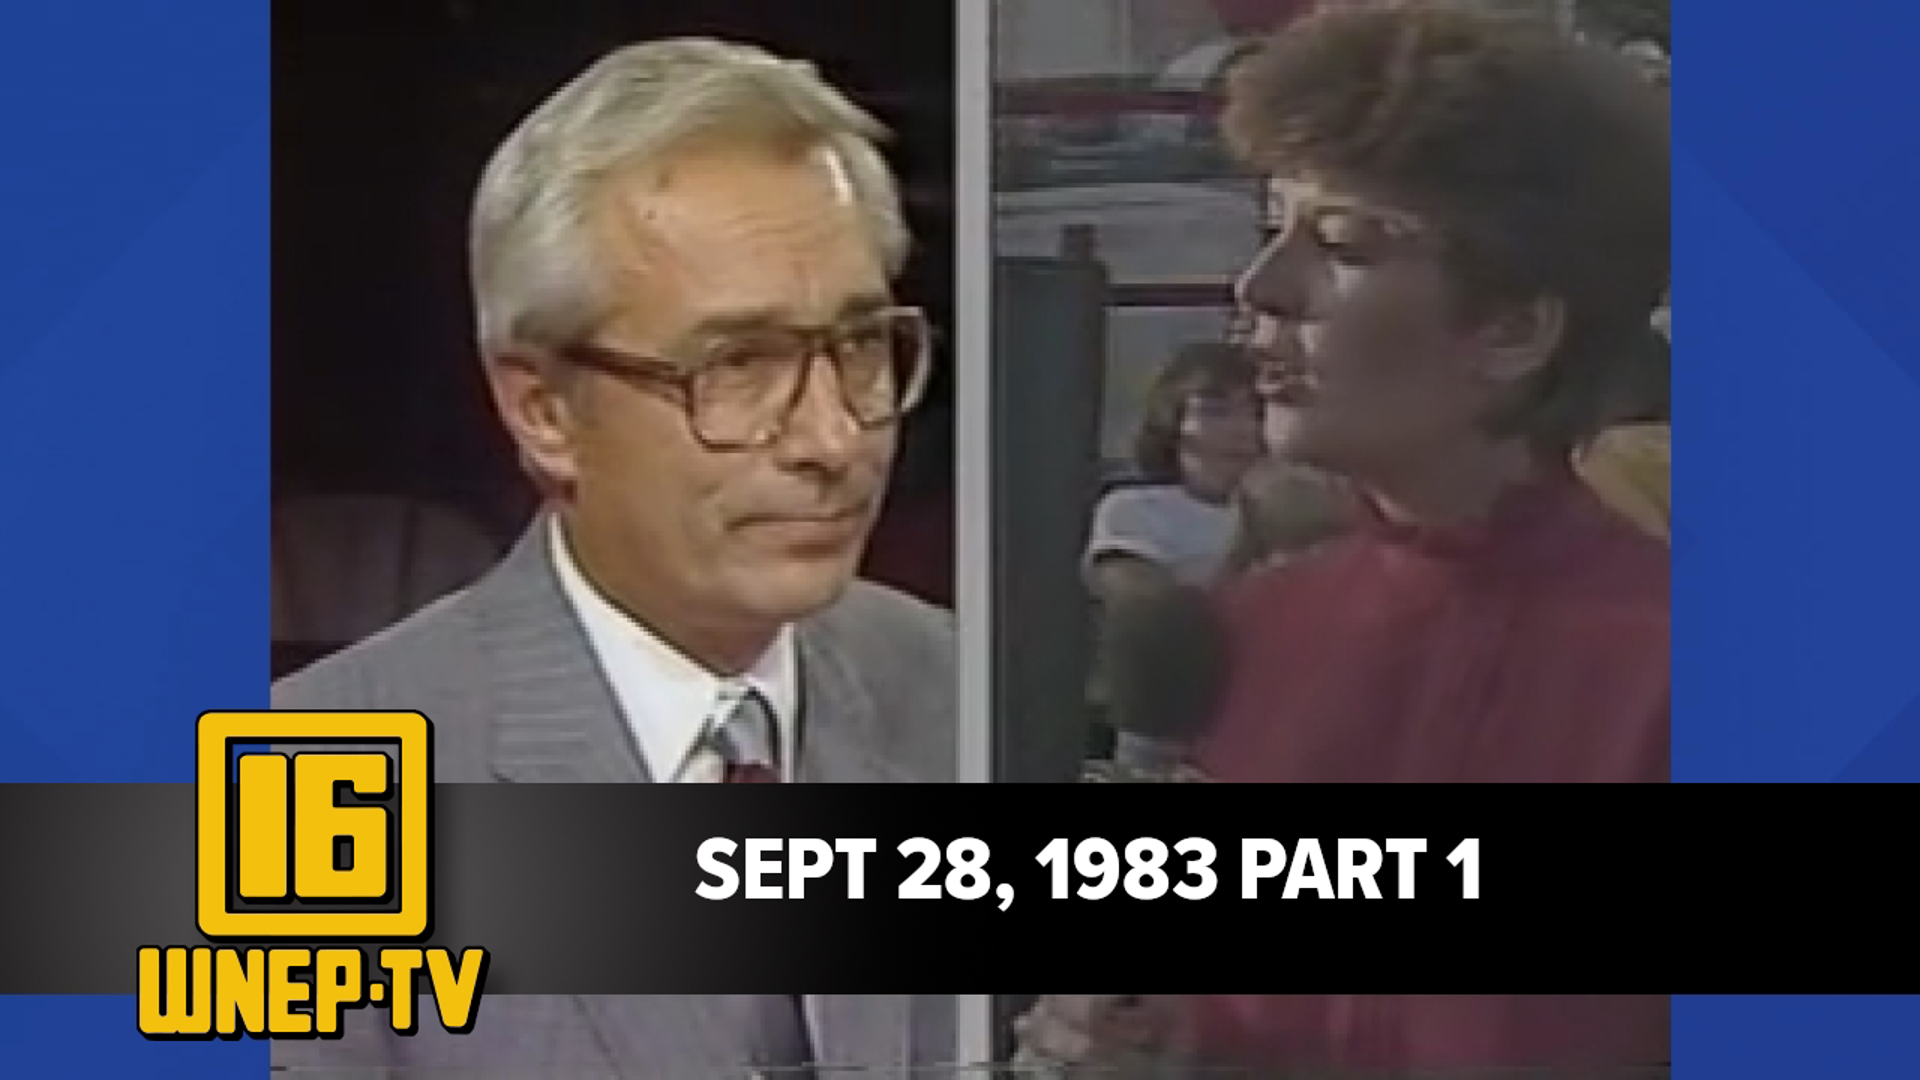 Watch Nolan Johannes with Karen Harch live from the Bloomsburg fair from September 28, 1983.